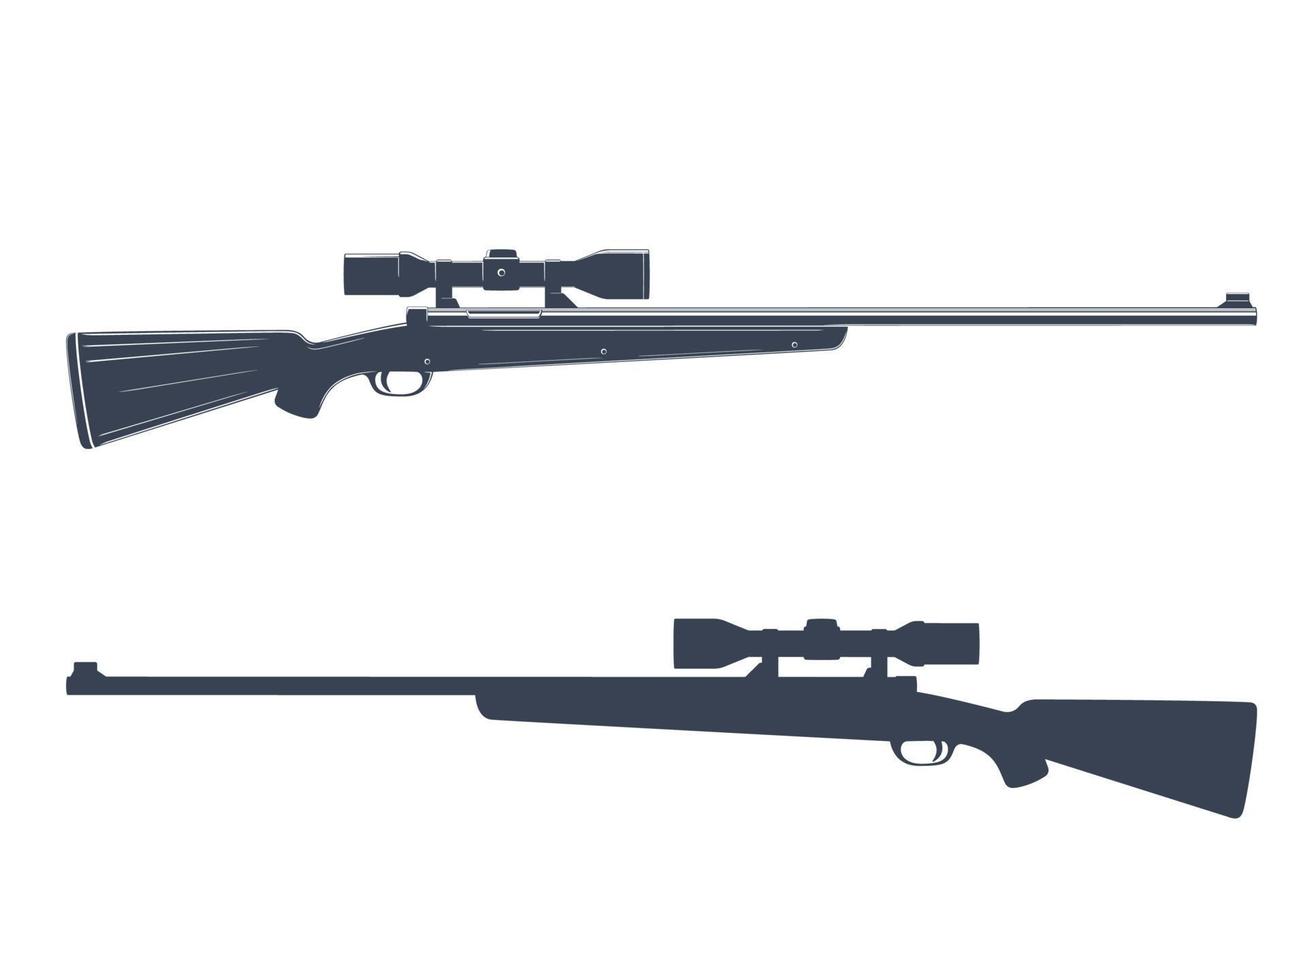 Hunting rifle with telescopic sight, silhouette of sniper firearm vector